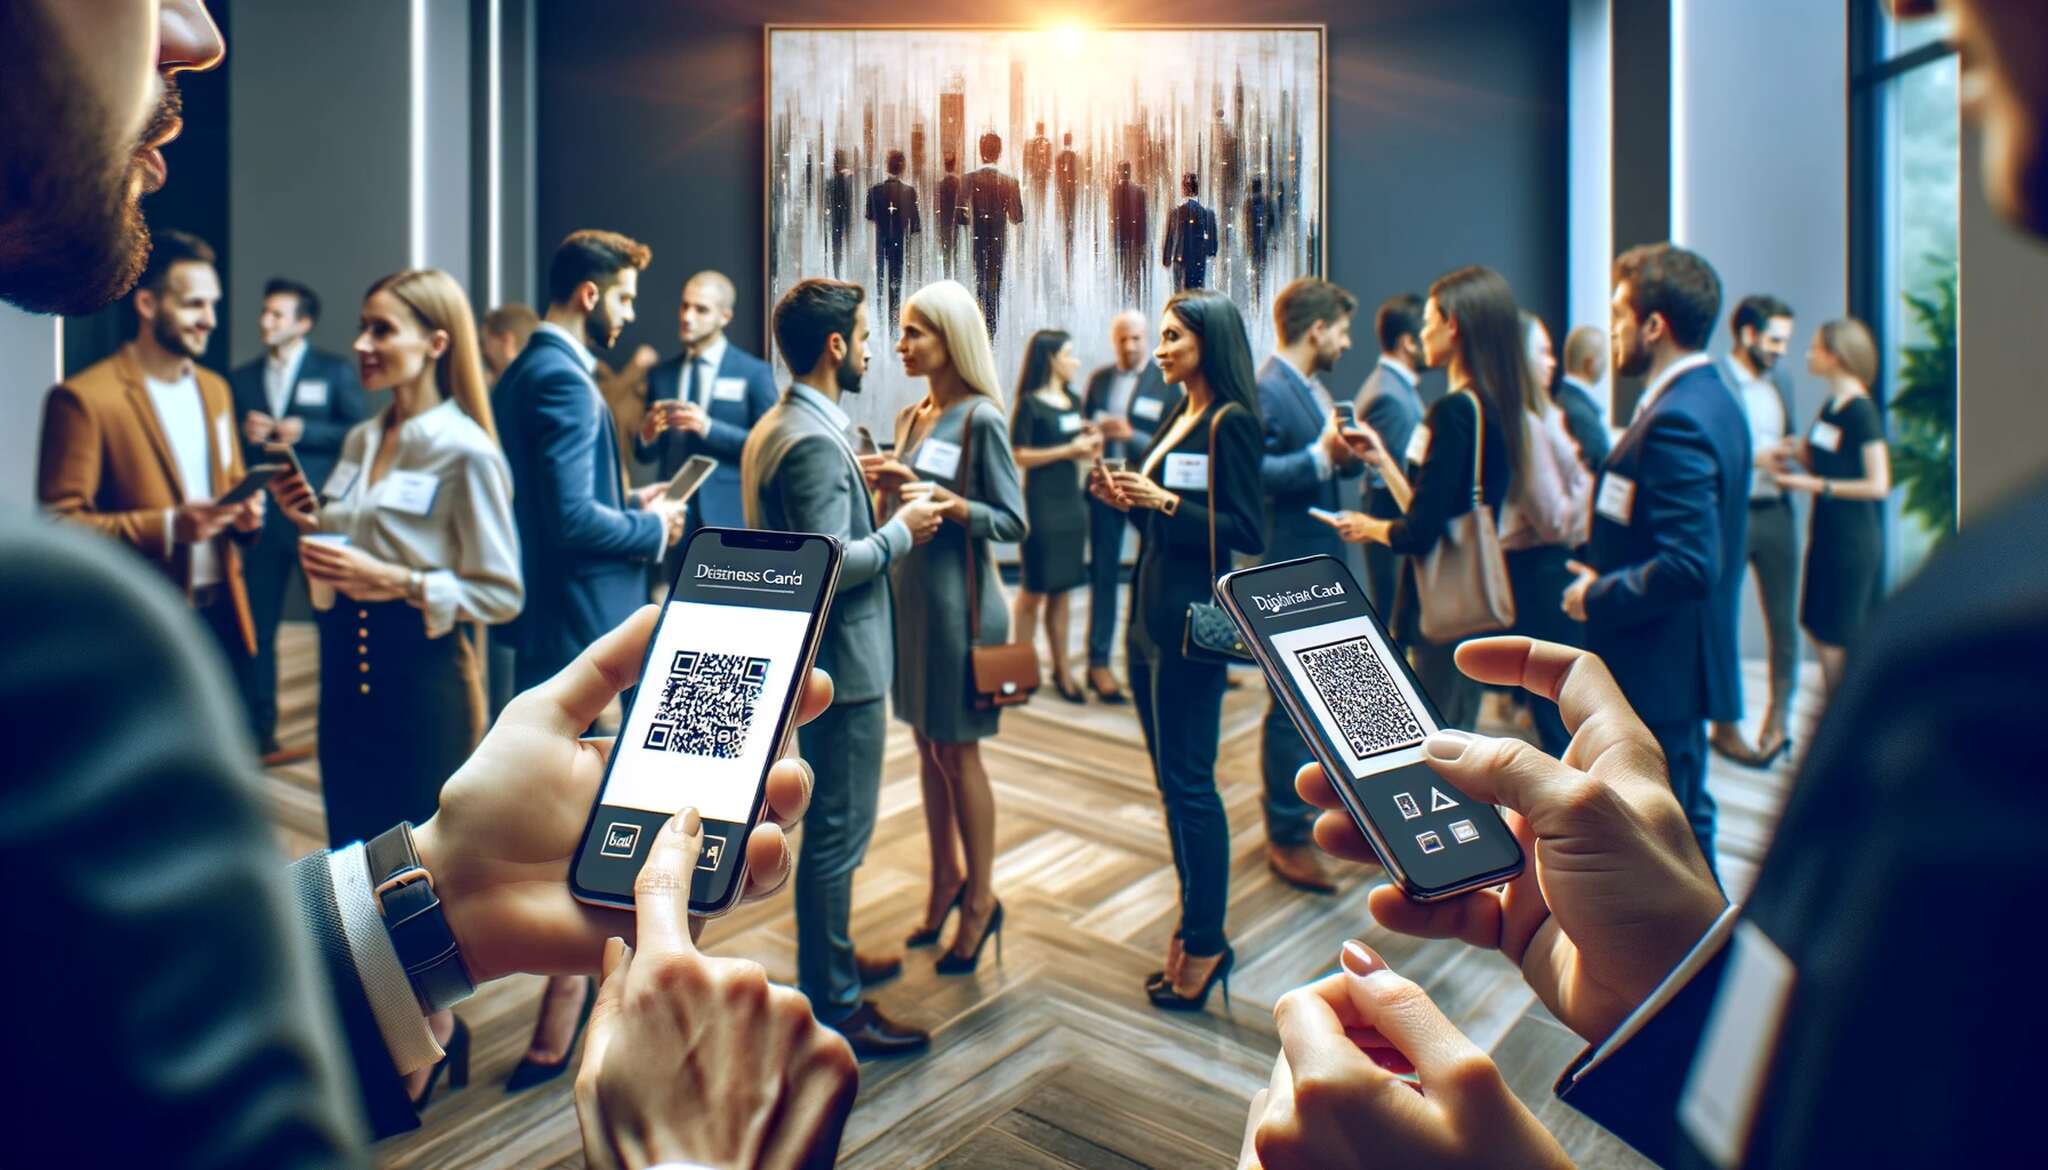 A networking event with professionals engaging in conversation while holding smartphones that show digital business cards